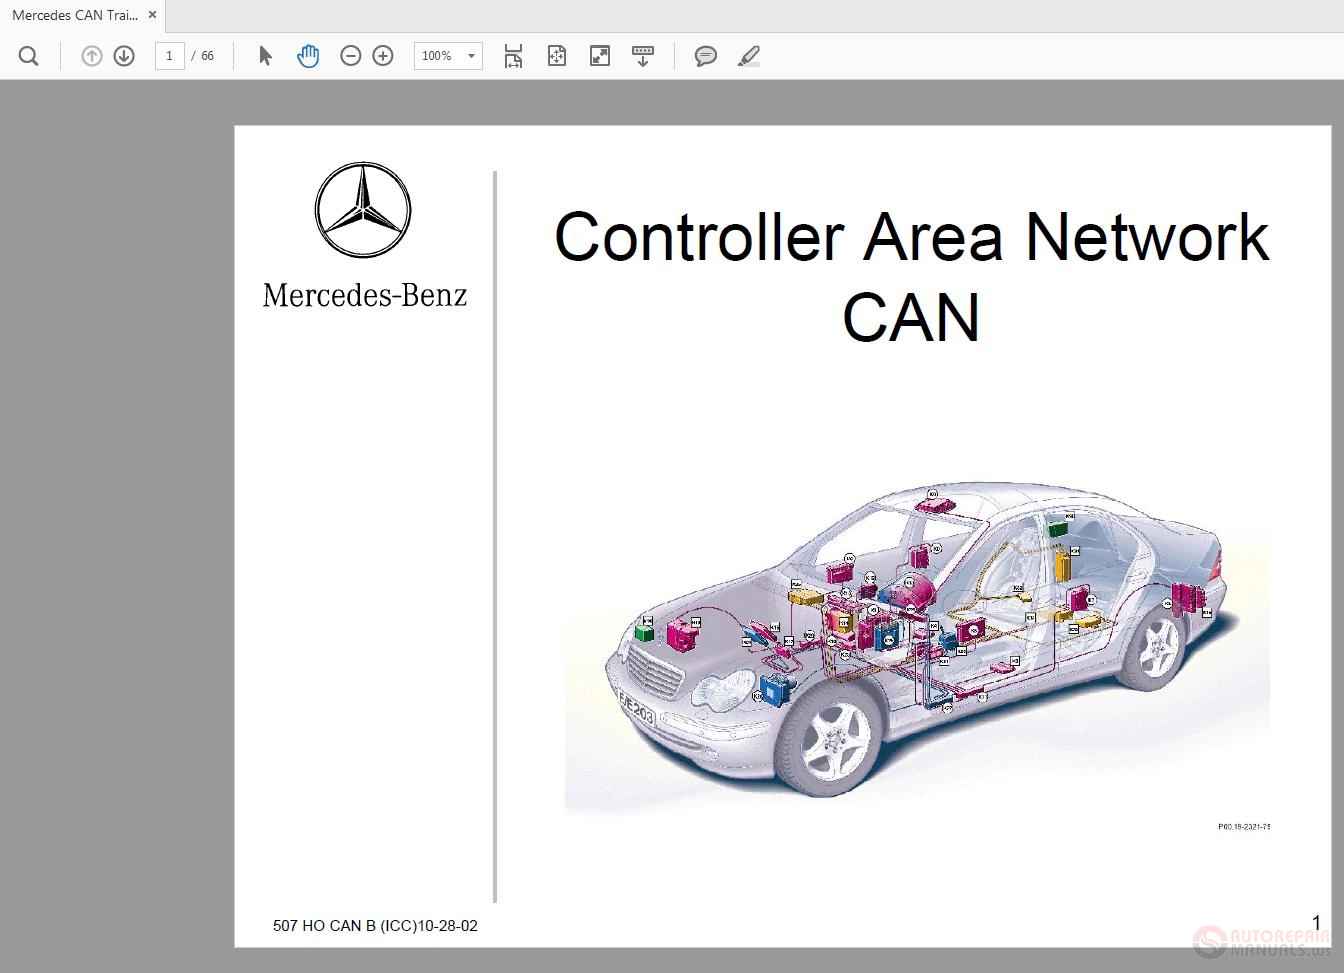 Area control. Can (Controller area Network). Controller area Network can w202. Can Mercedes. Network Мерседес.